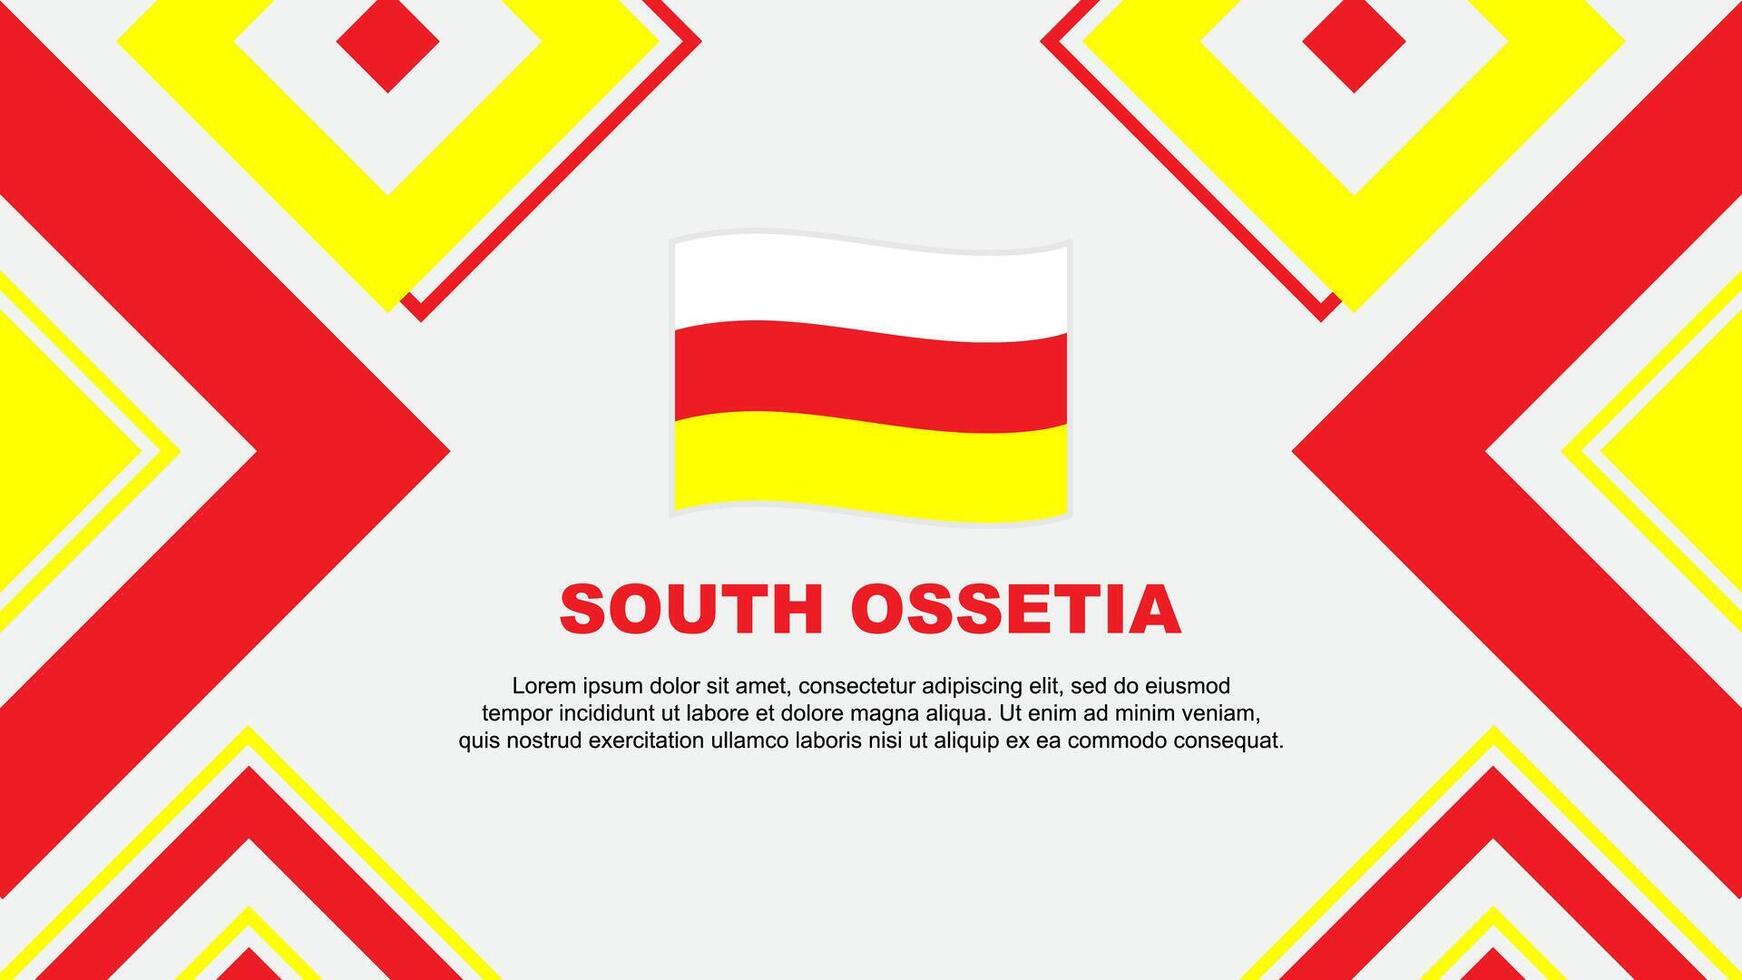 South Ossetia Flag Abstract Background Design Template. South Ossetia Independence Day Banner Wallpaper Vector Illustration. South Ossetia Independence Day